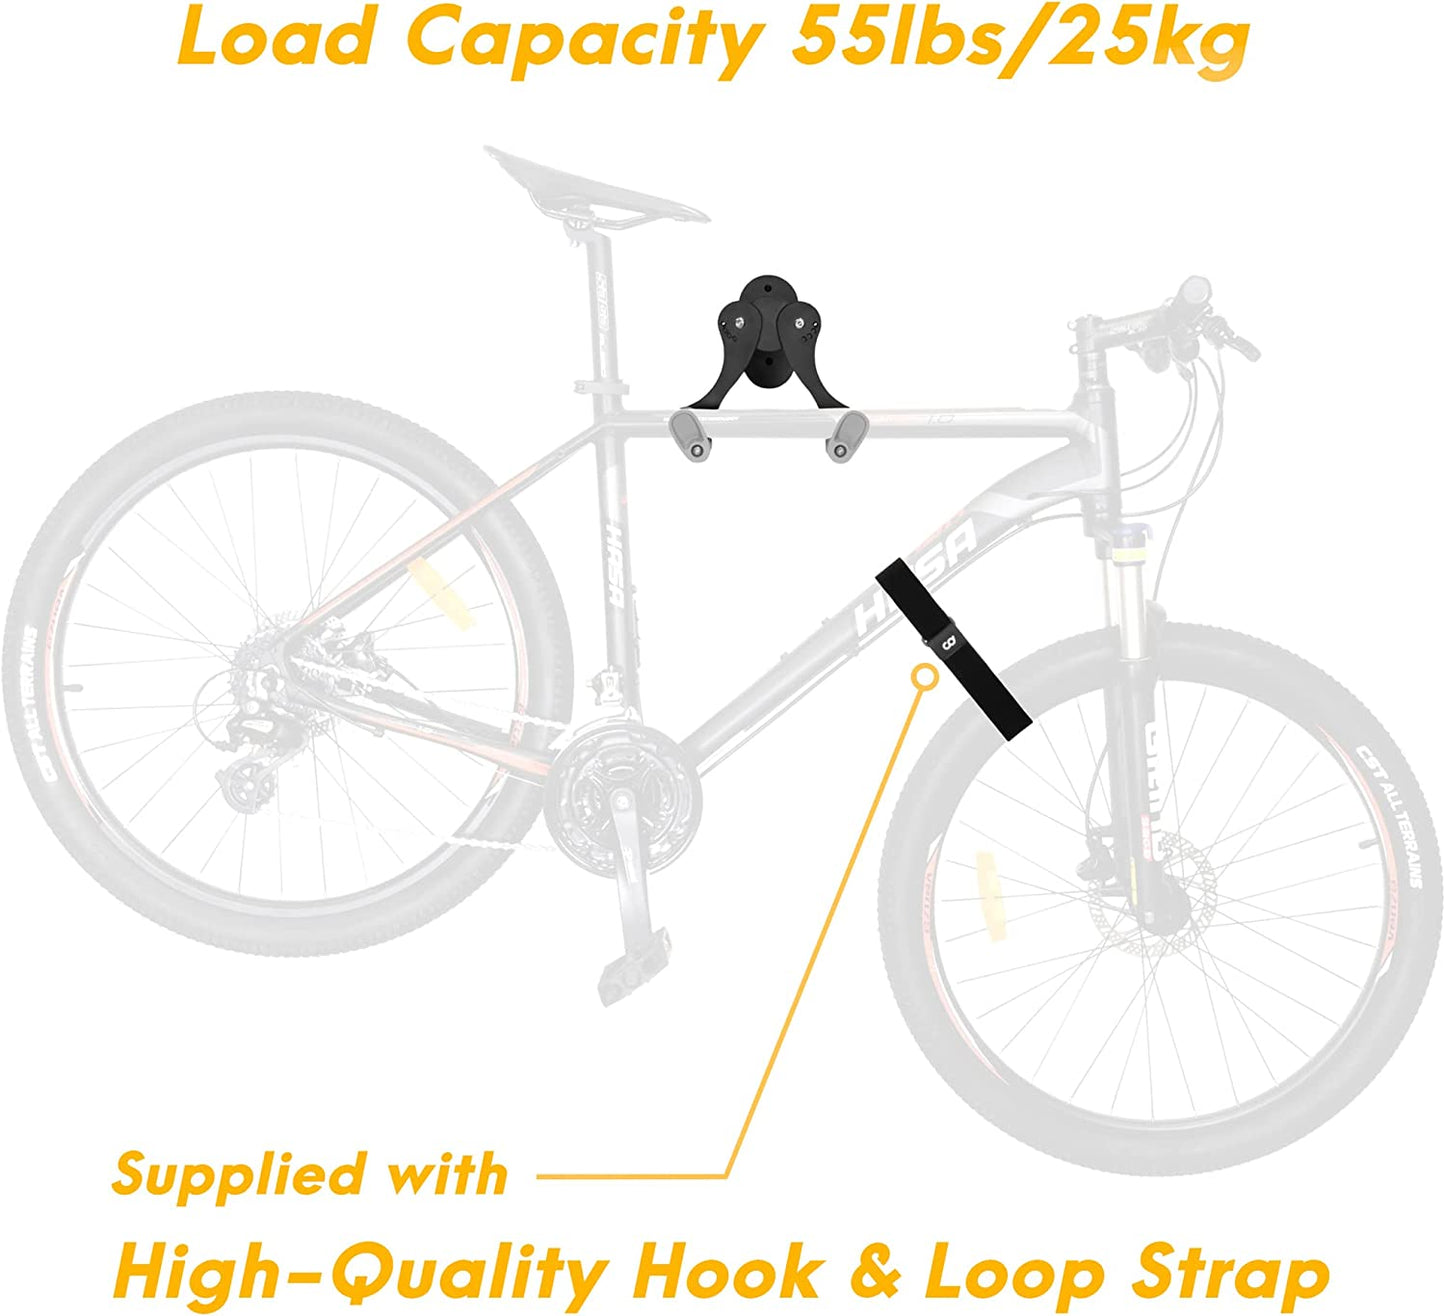 Adjustable and Foldable Bike Wall Mount Rack - Secure Indoor Storage Solution for MTB and Road Bicycles Ideal for Garage or Home Use